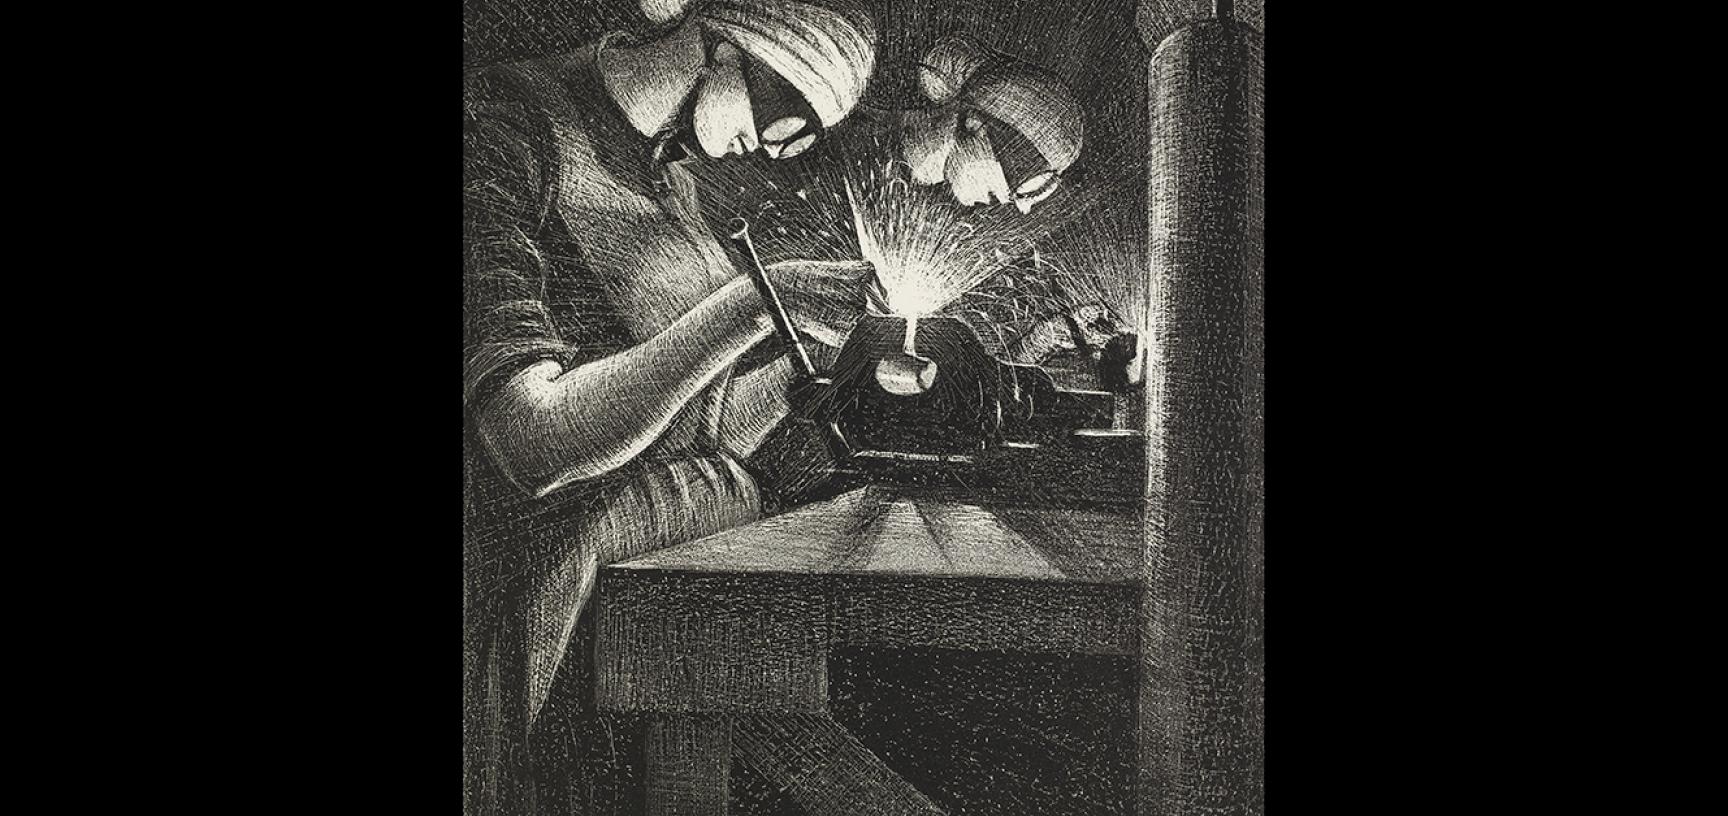 Christopher Nevinson, Acetylene Welders, 1917 © Ashmolean Museum, Presented by the Ministry of Information, WA1919.31.39